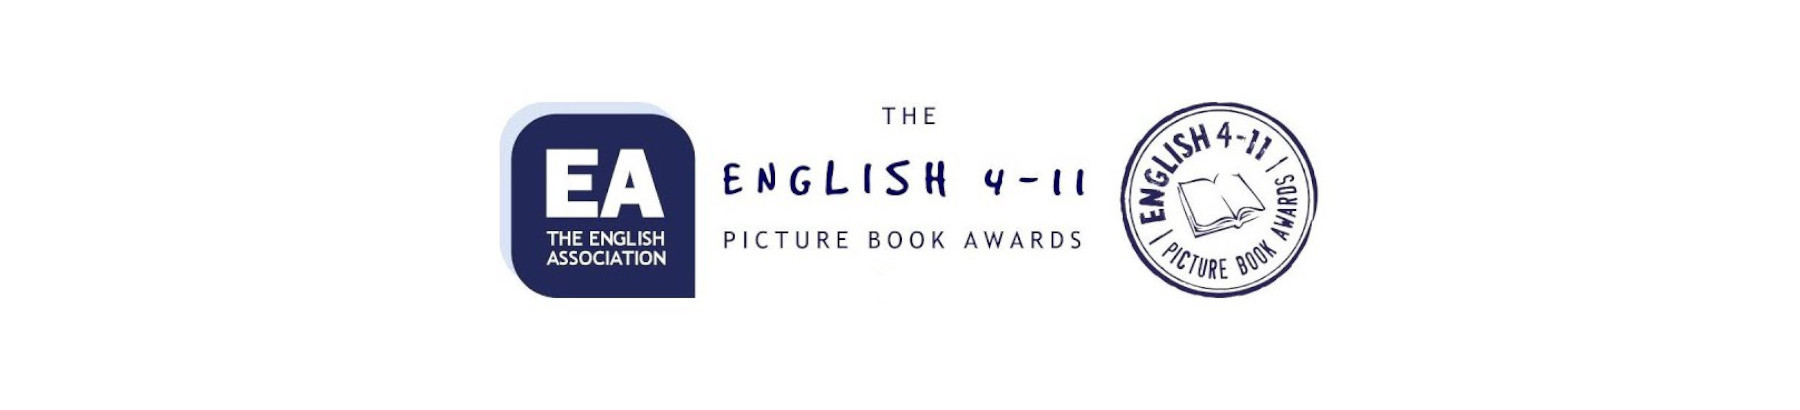 English 4-11 Picture Book Awards 2023